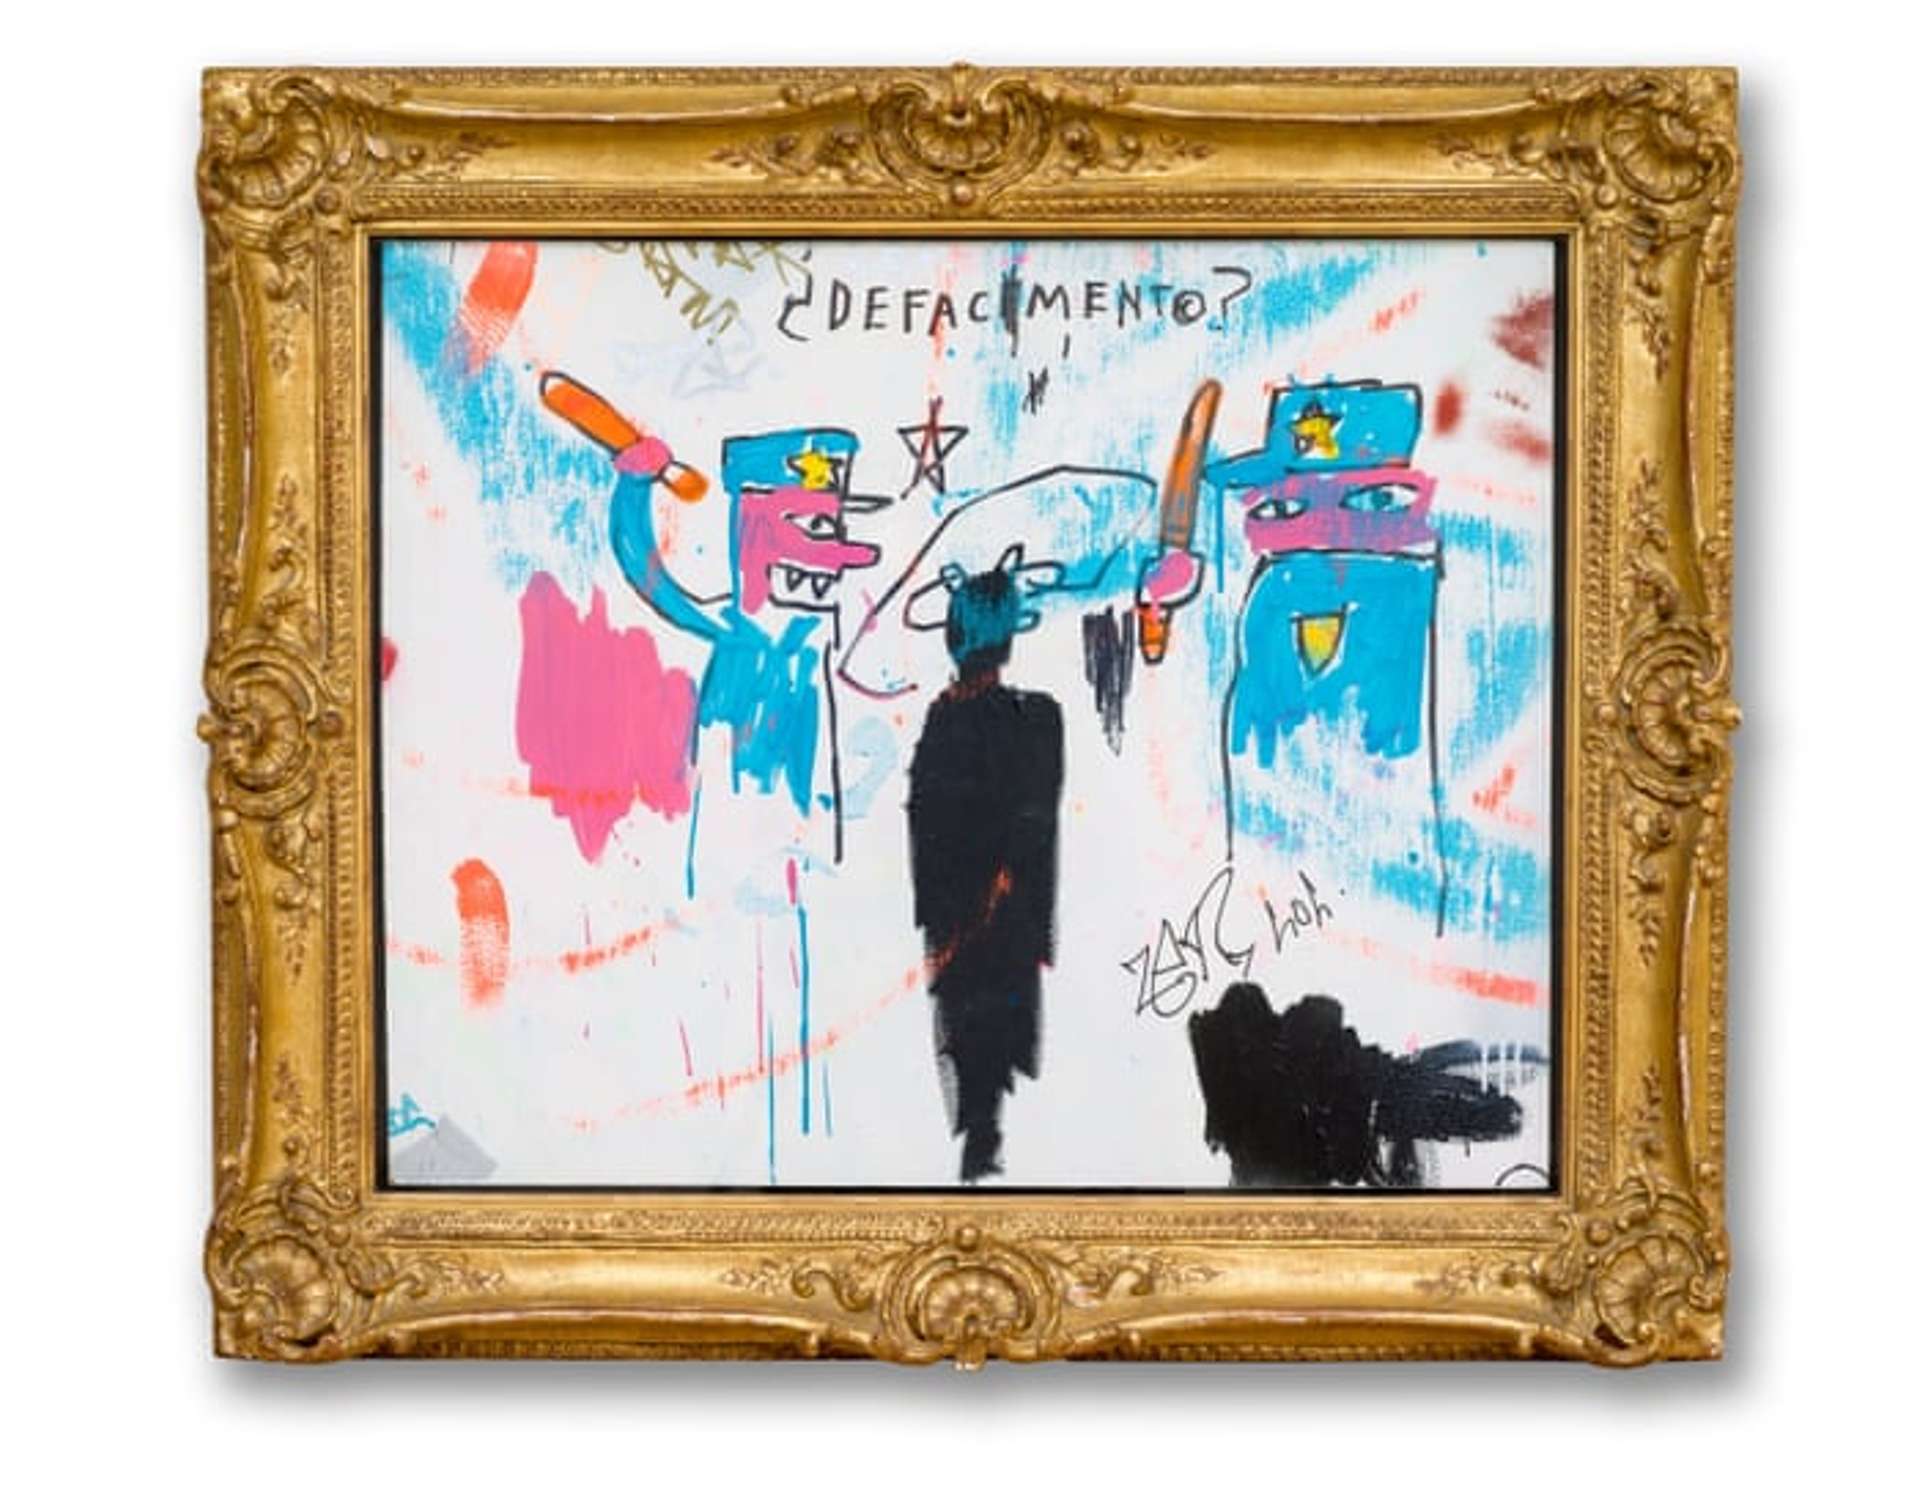 An image of the artwork Defacement by Jean-Michel Basquiat. It shows two policemen, depicted in a crude style, beating a figure in black with bats.